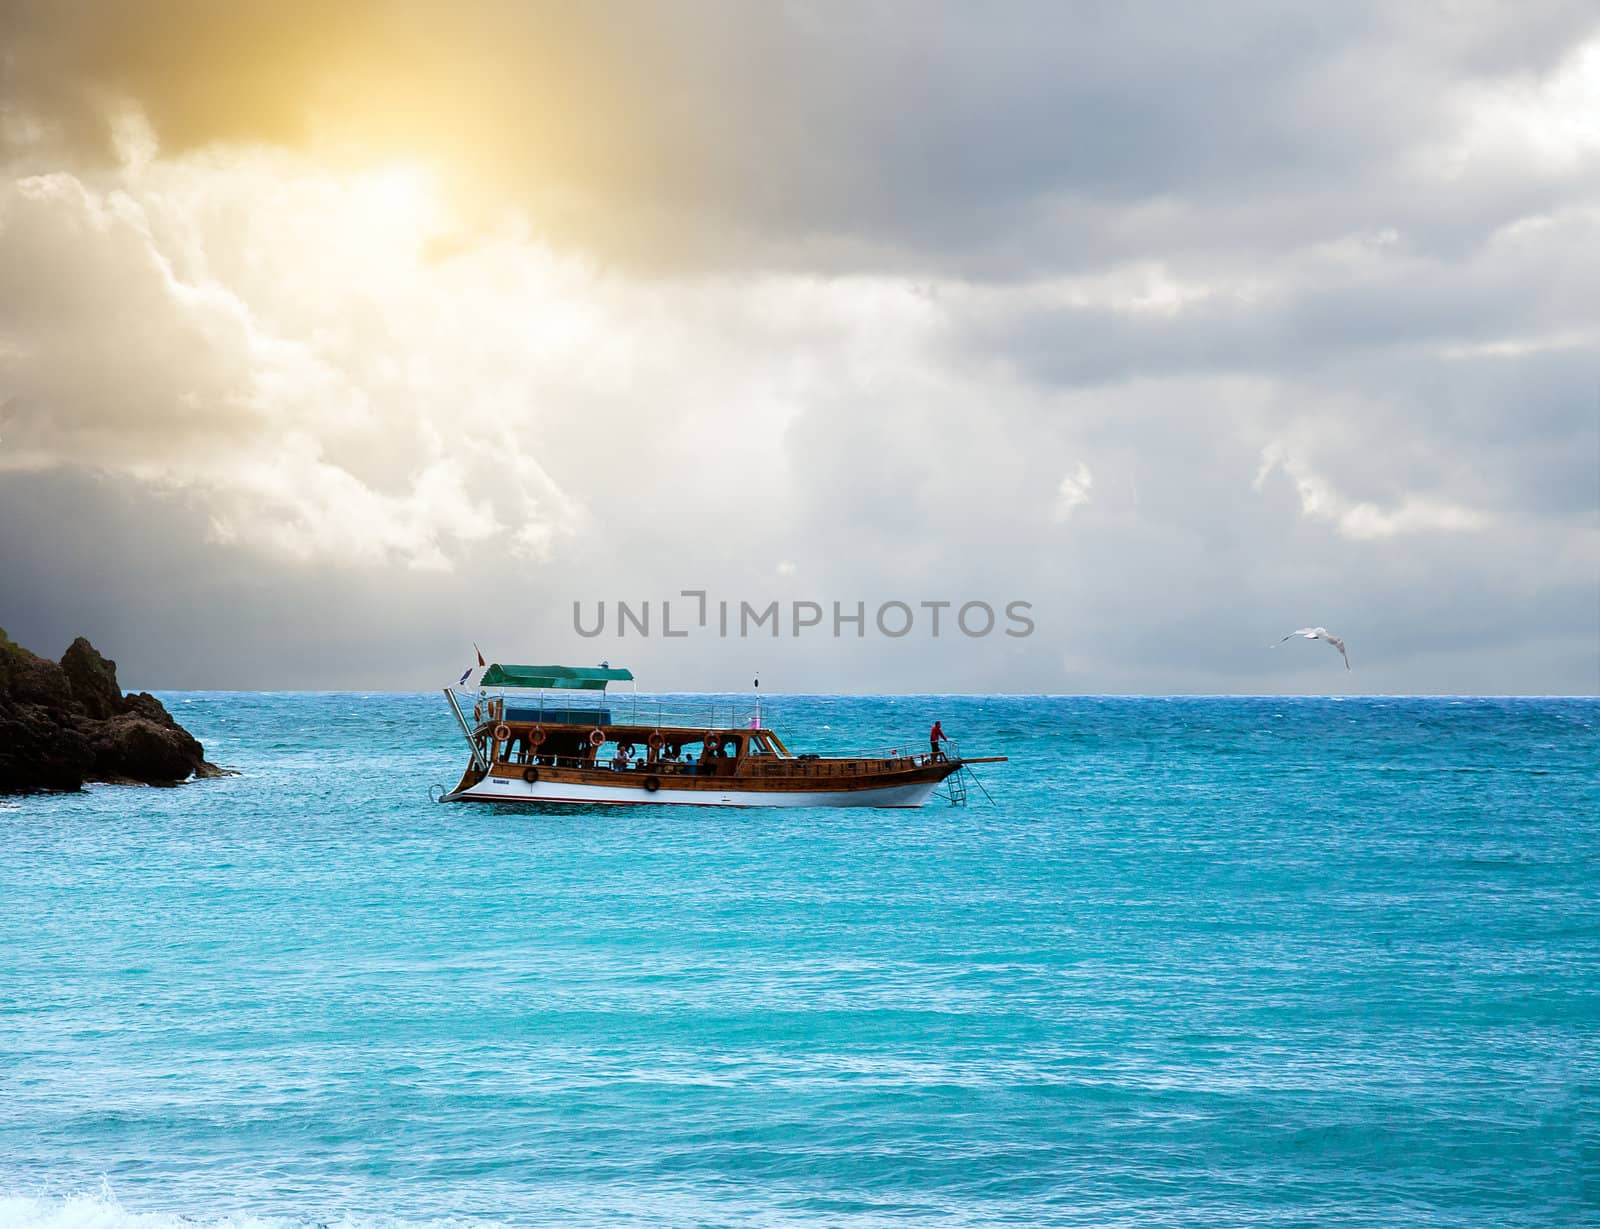 boat in the sea and stormy sky by sfinks